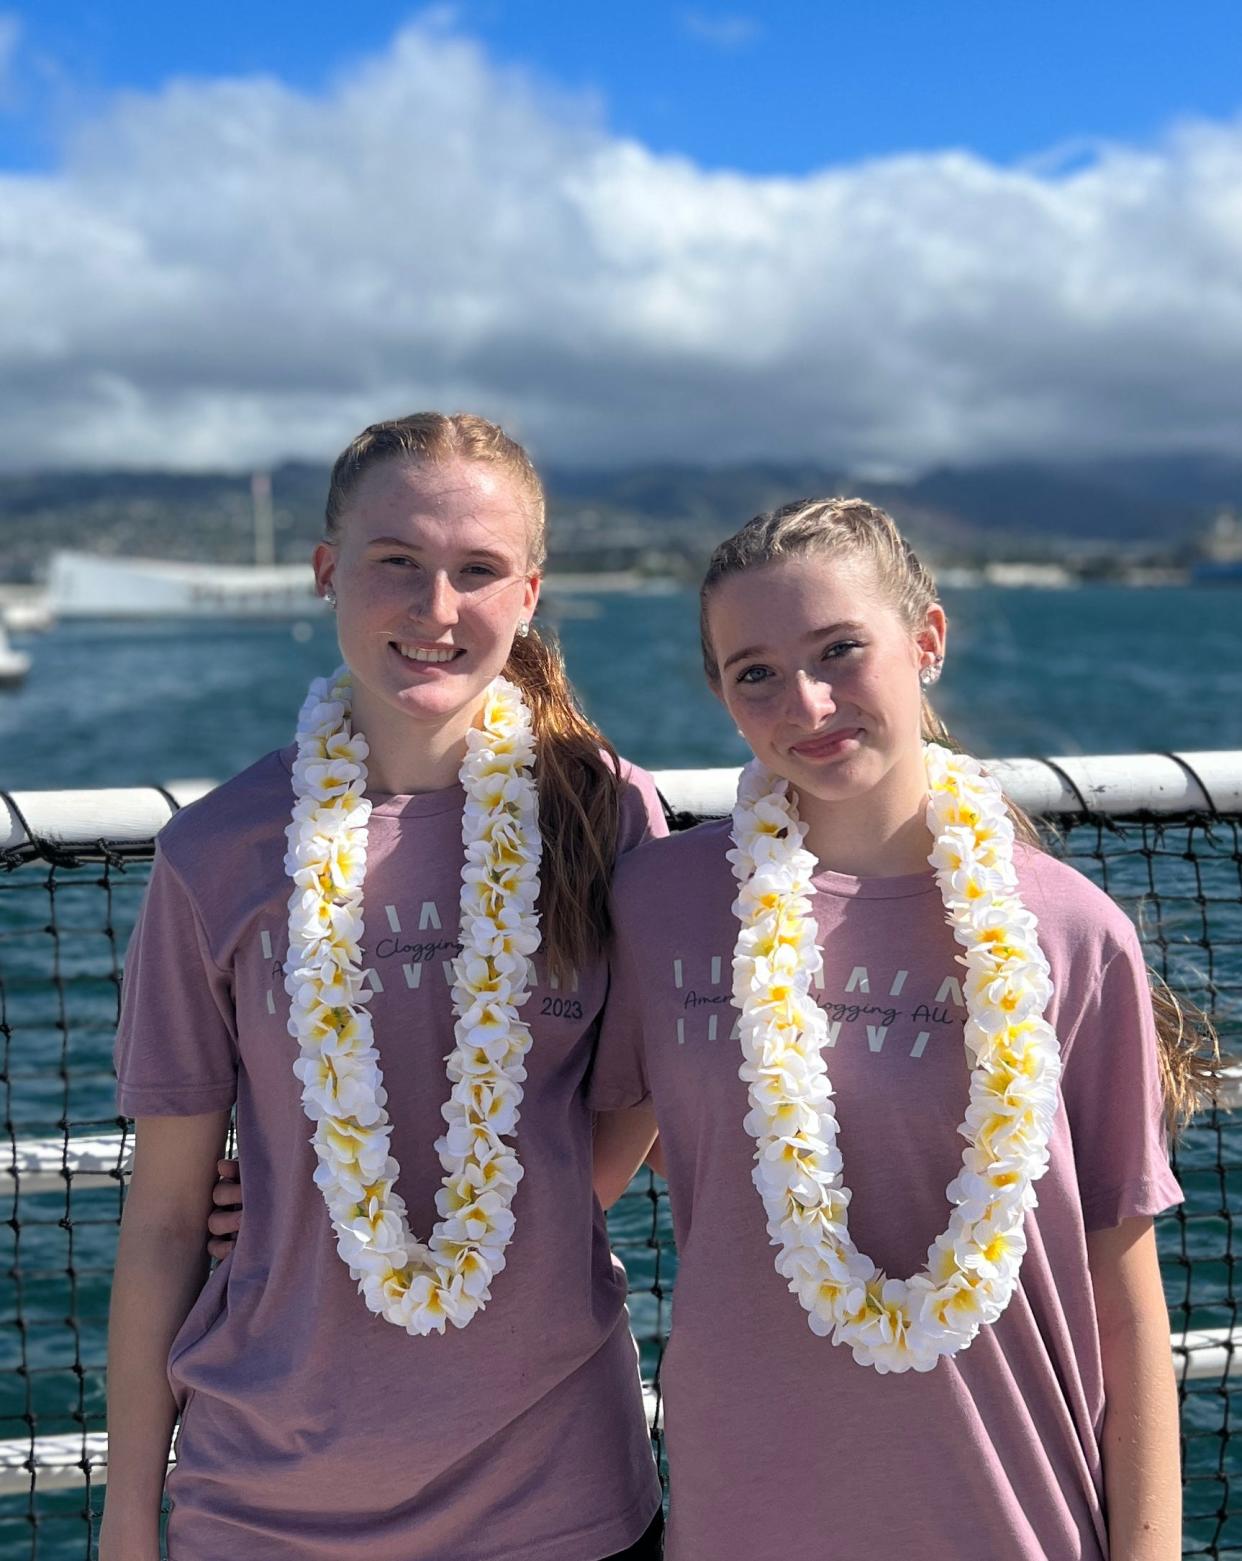 Lexie and Madison Kelley, residents of Surf City, N.C., are scheduled to perform in the Pearl Harbor Memorial Parade in Honolulu, Hawaii, on Dec. 7.